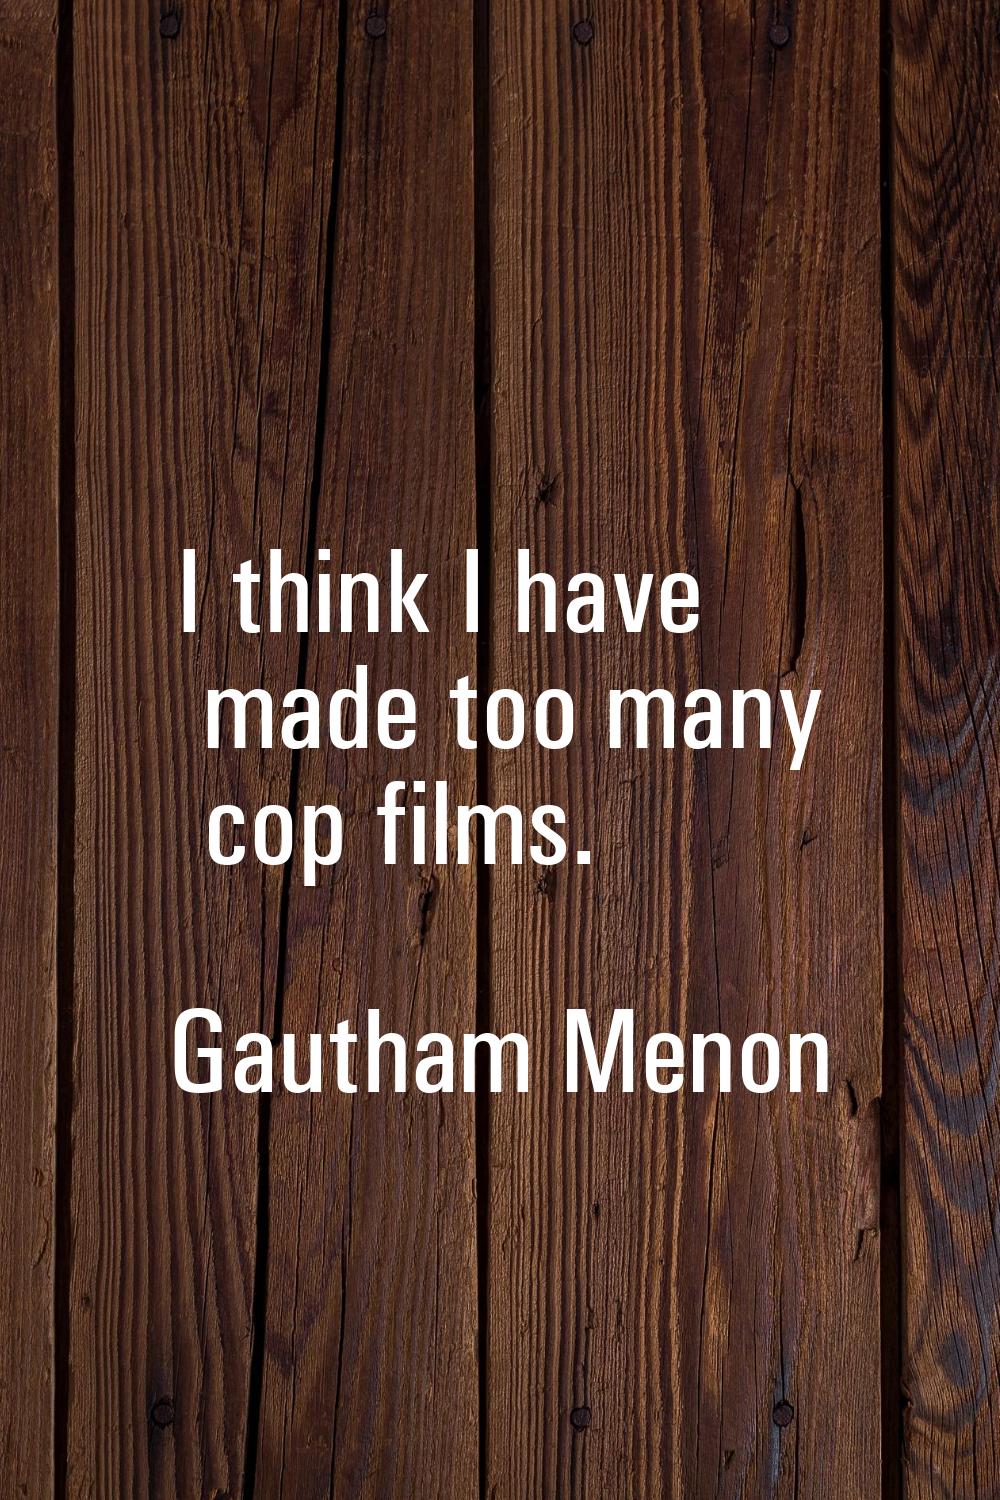 I think I have made too many cop films.